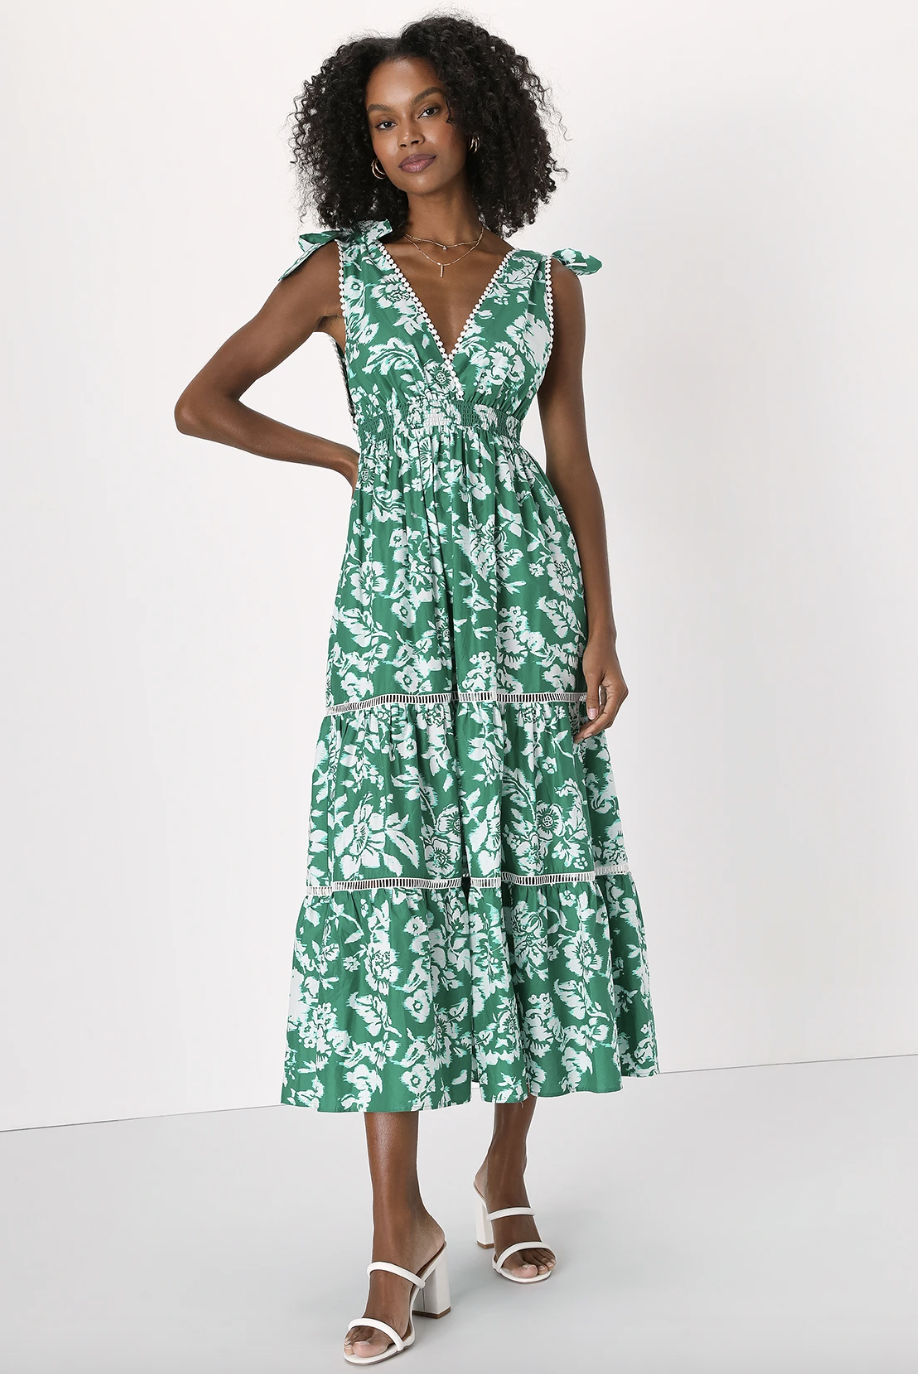 model wearing green and white floral dress, Sweet Spectacle Green Floral Tie-Strap Maxi Dress (photo via Lulus)